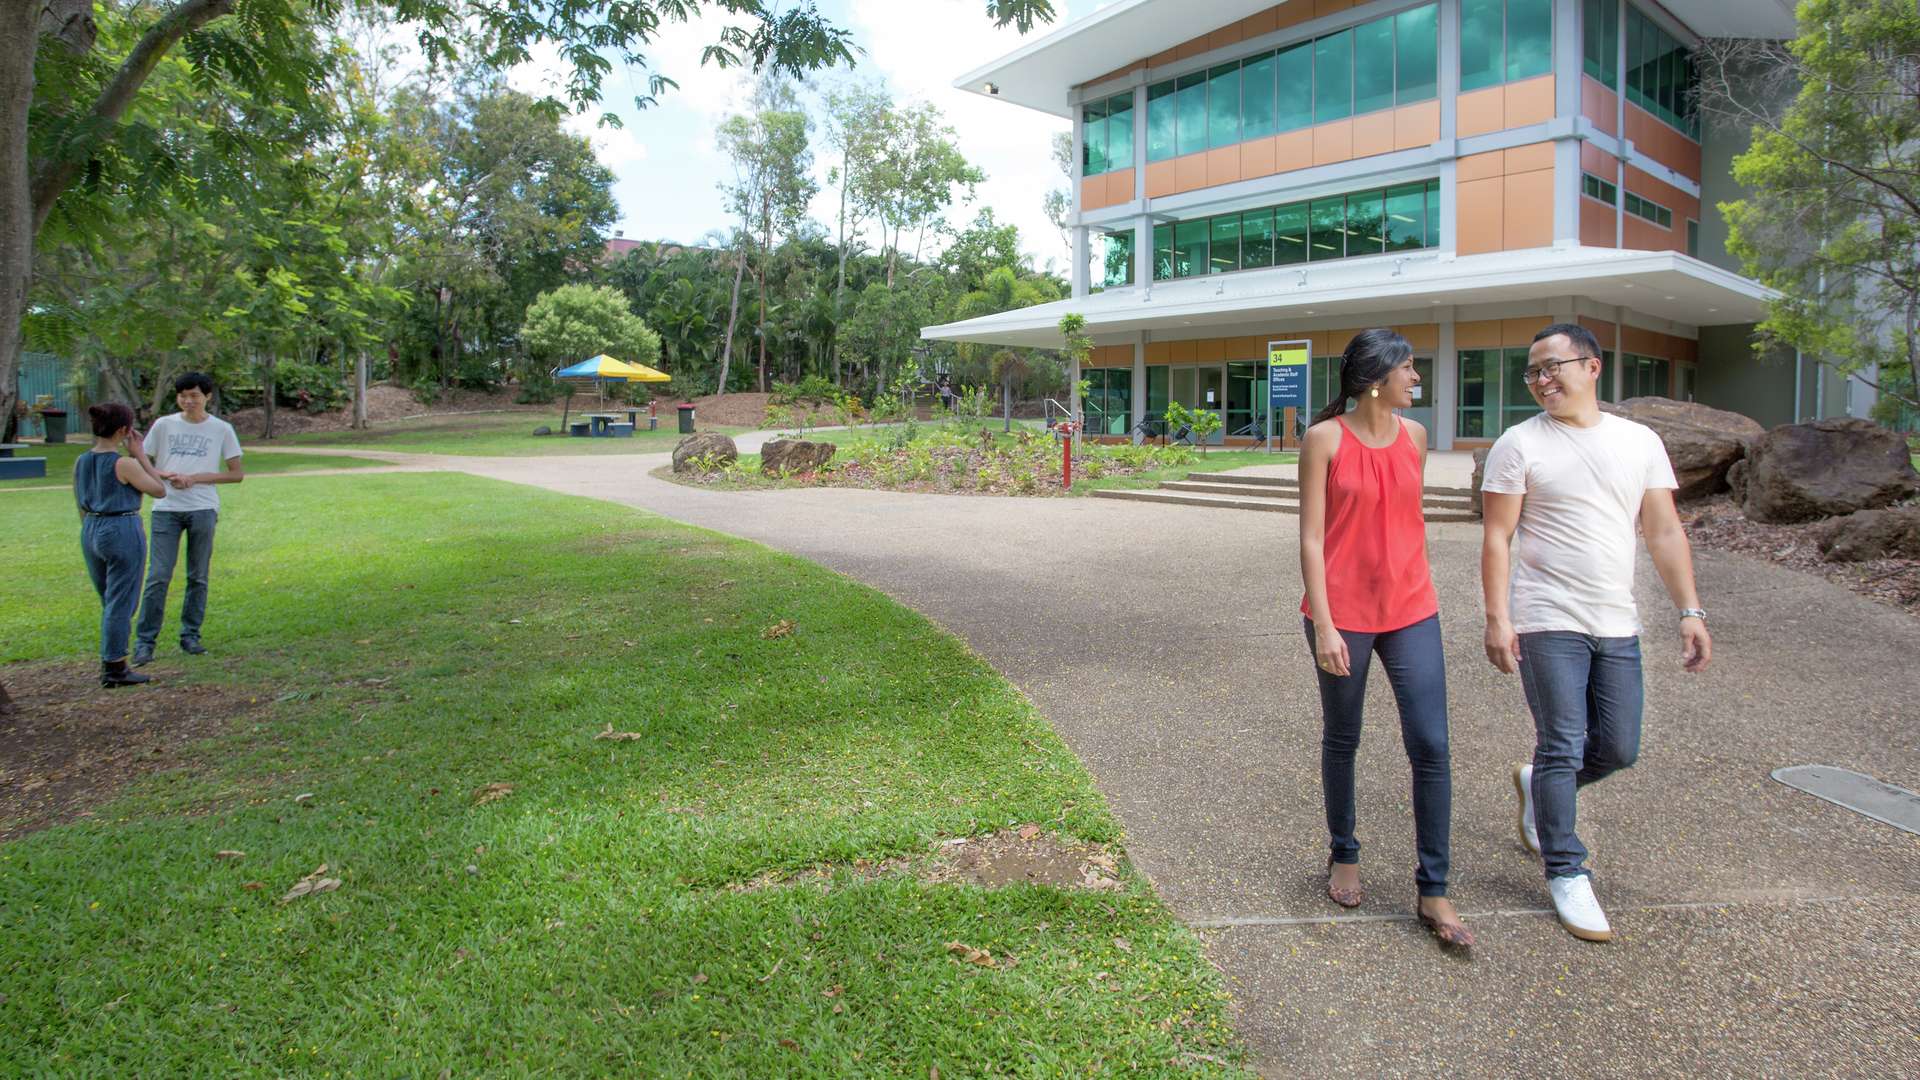 Two students chatting and walking along a landscaped path outside Rockhampton campus